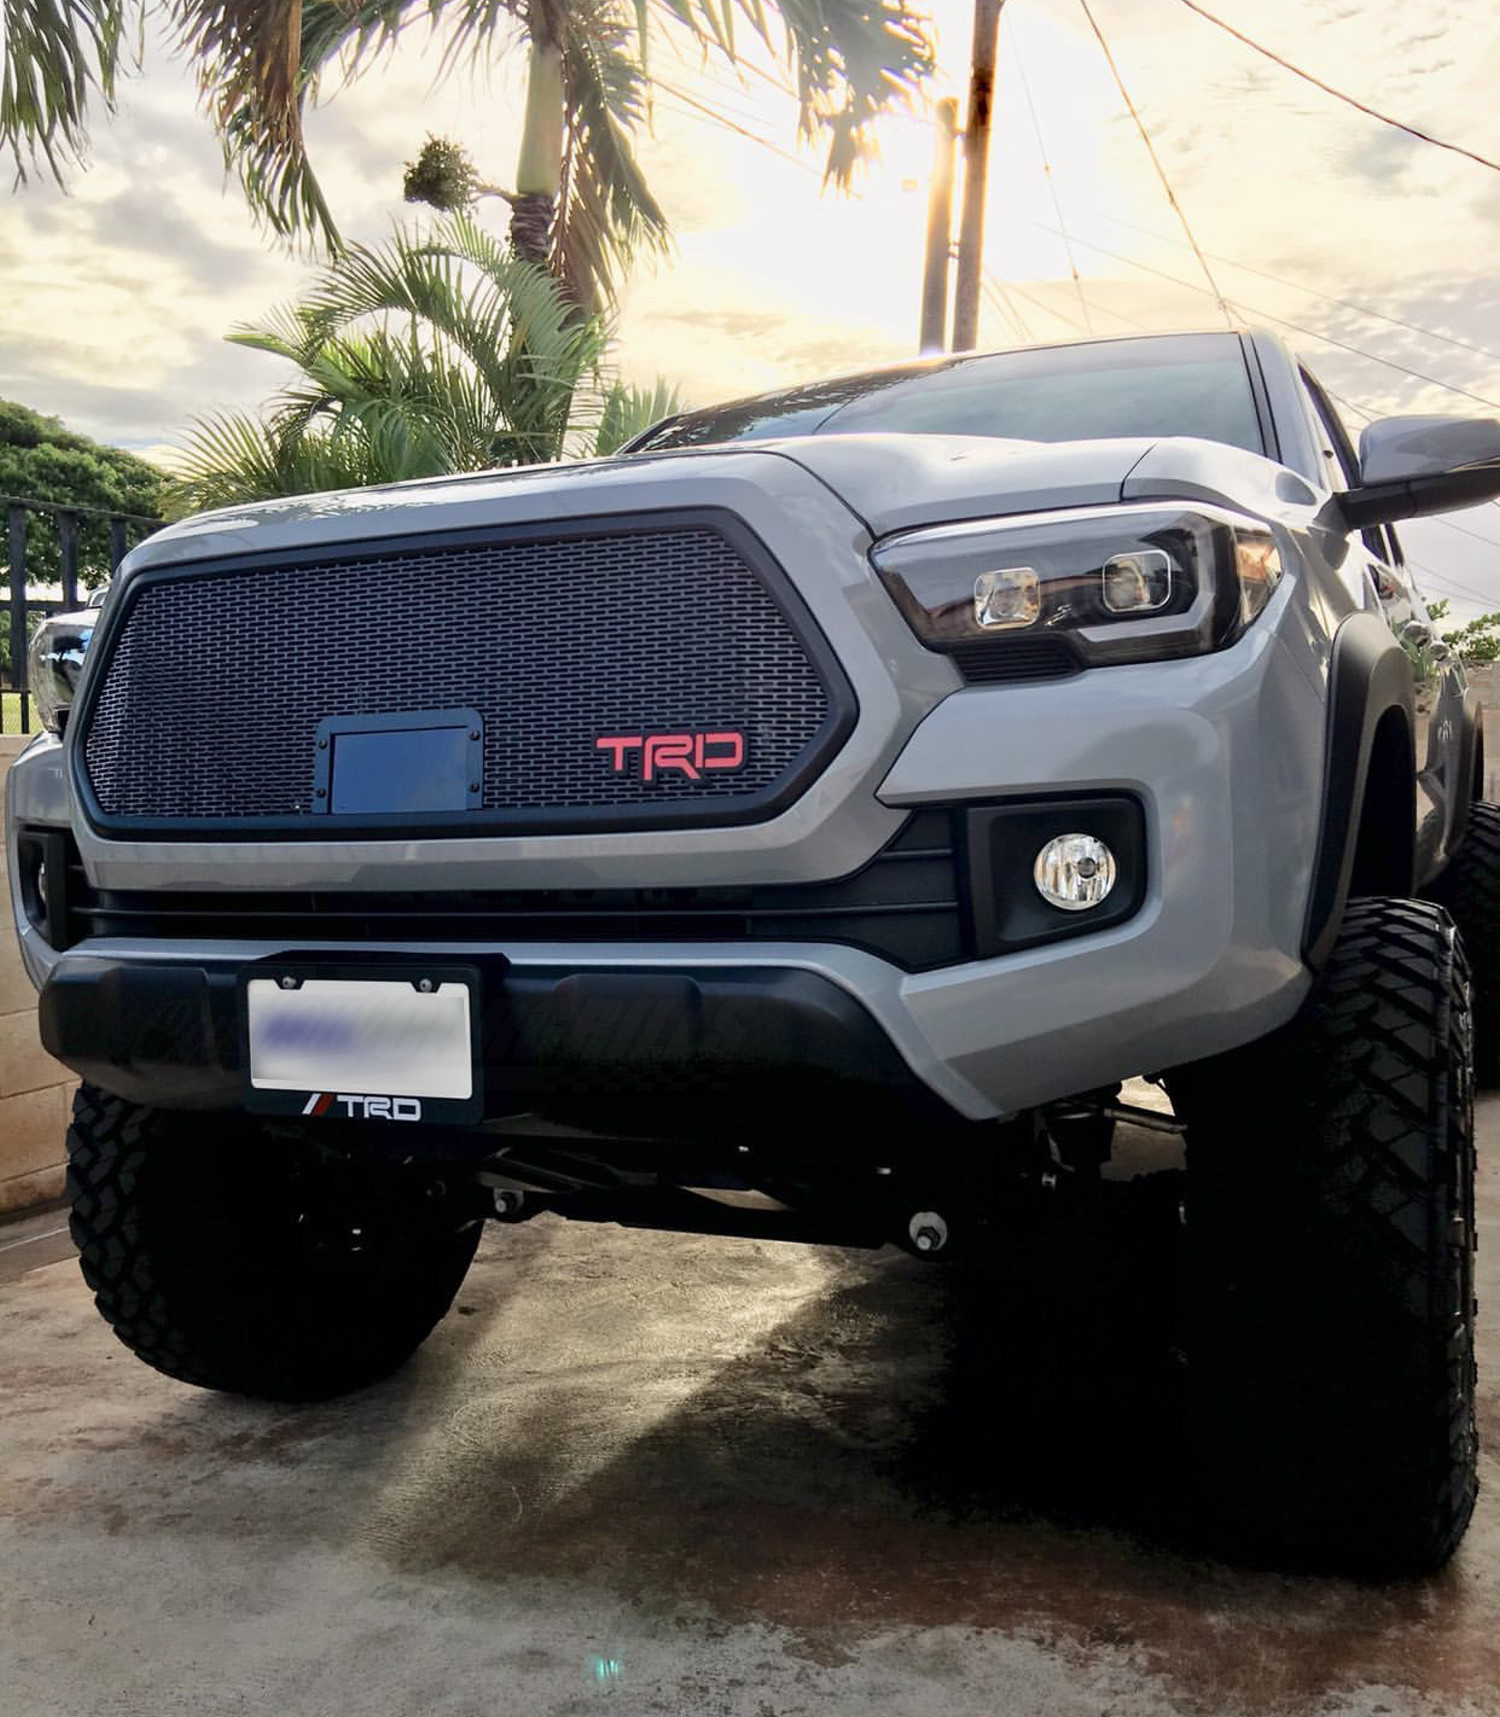 2020 Toyota Tacoma Grille: More Options than Just the Fake TRD Pro